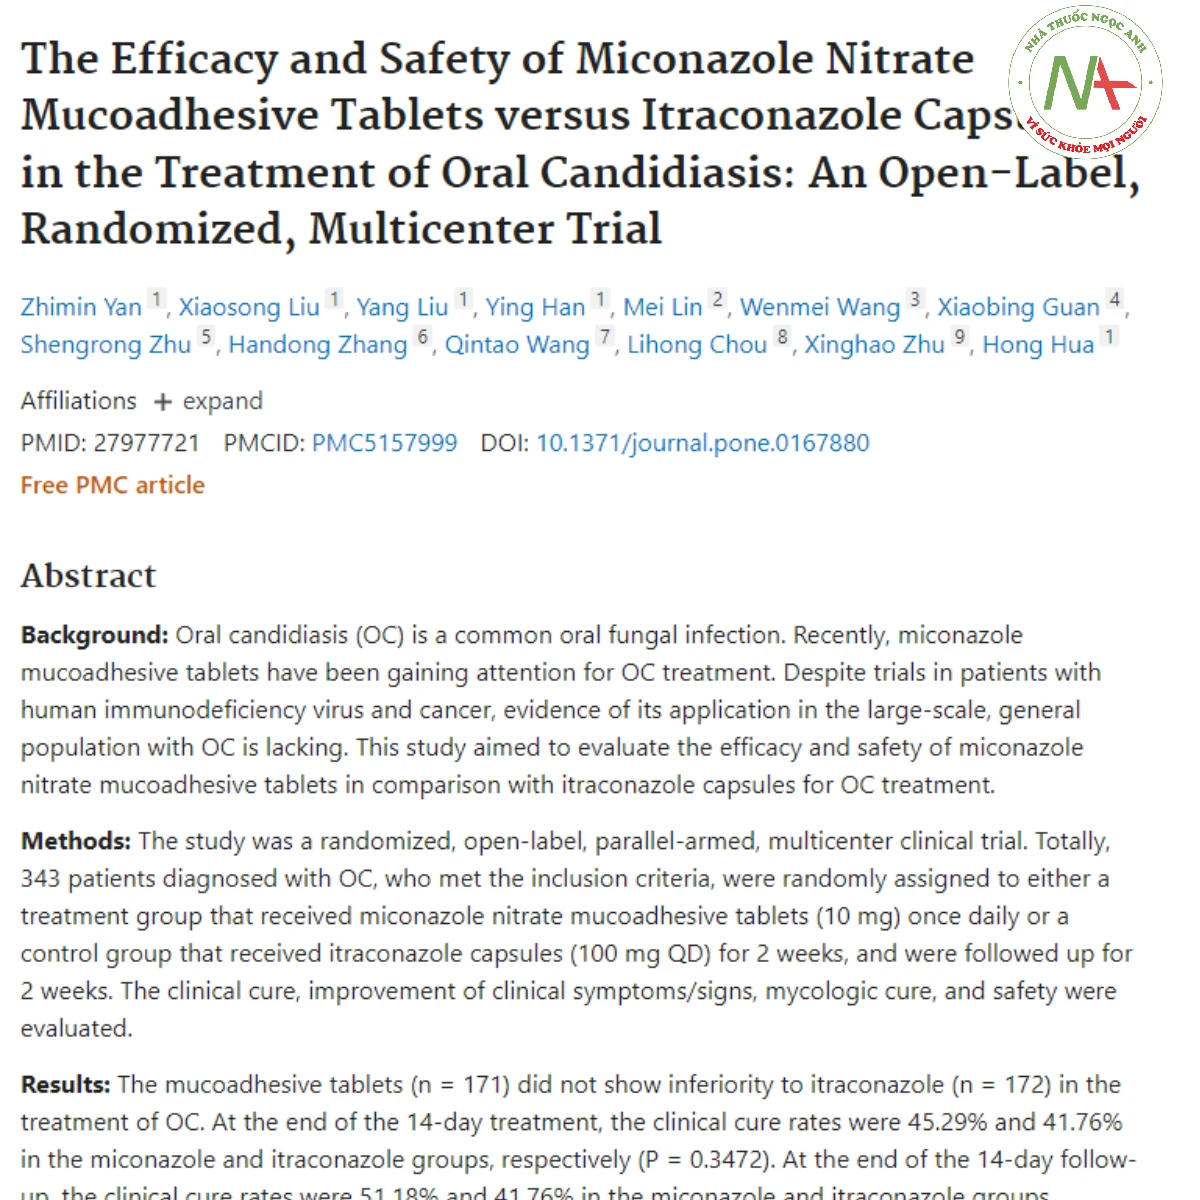 The Efficacy and Safety of Miconazole Nitrate Mucoadhesive Tablets versus Itraconazole Capsules in the Treatment of Oral Candidiasis: An Open-Label, Randomized, Multicenter Trial